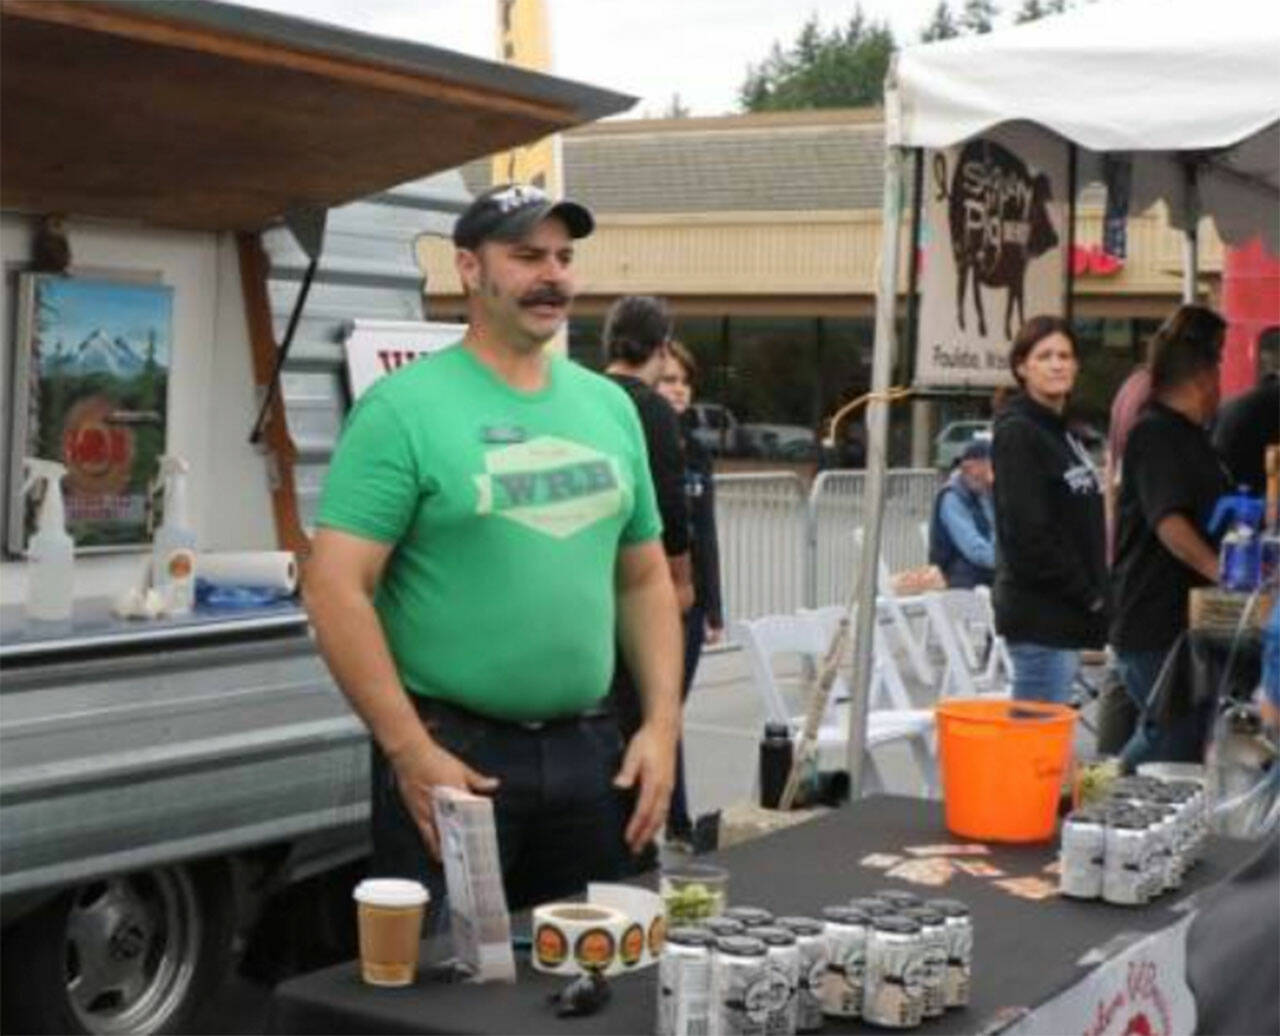 Wester Red Brewing at the inaugural Poulsbrew Beer Festival in 2019. File photos